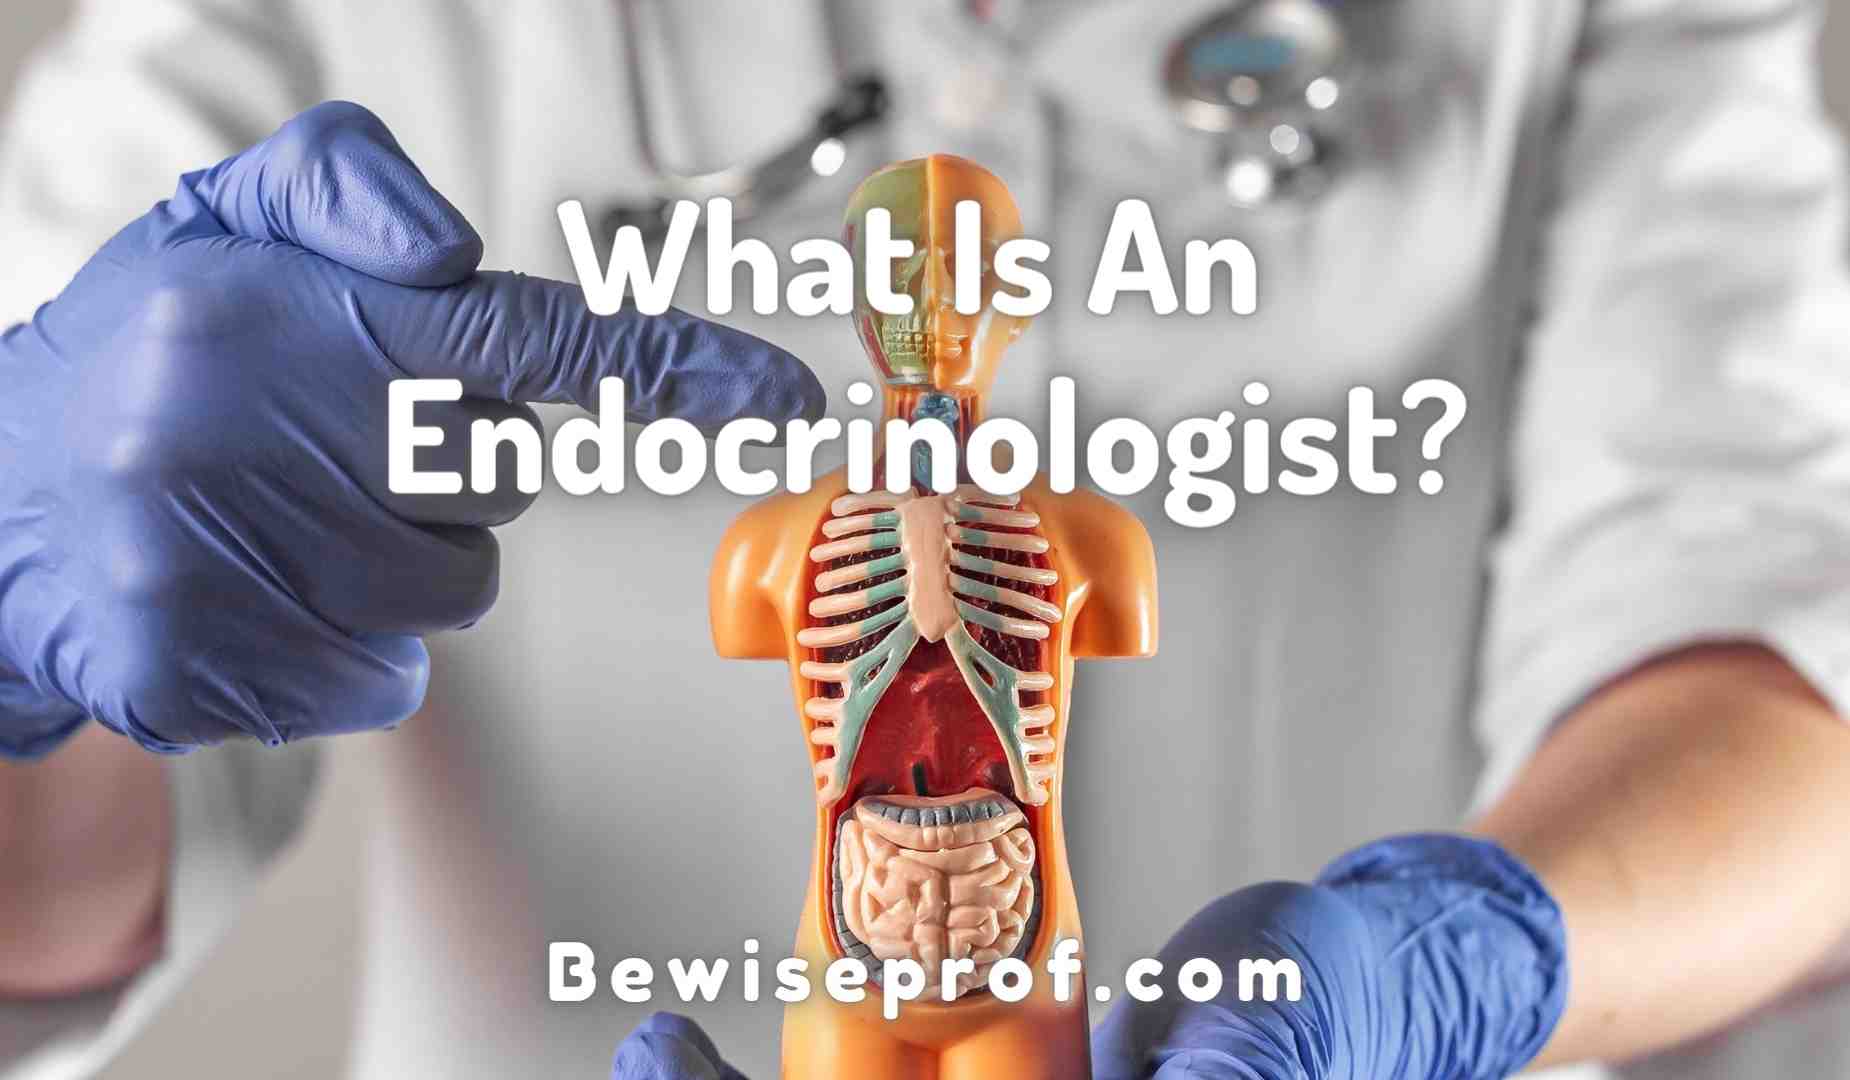 What Is An Endocrinologist?